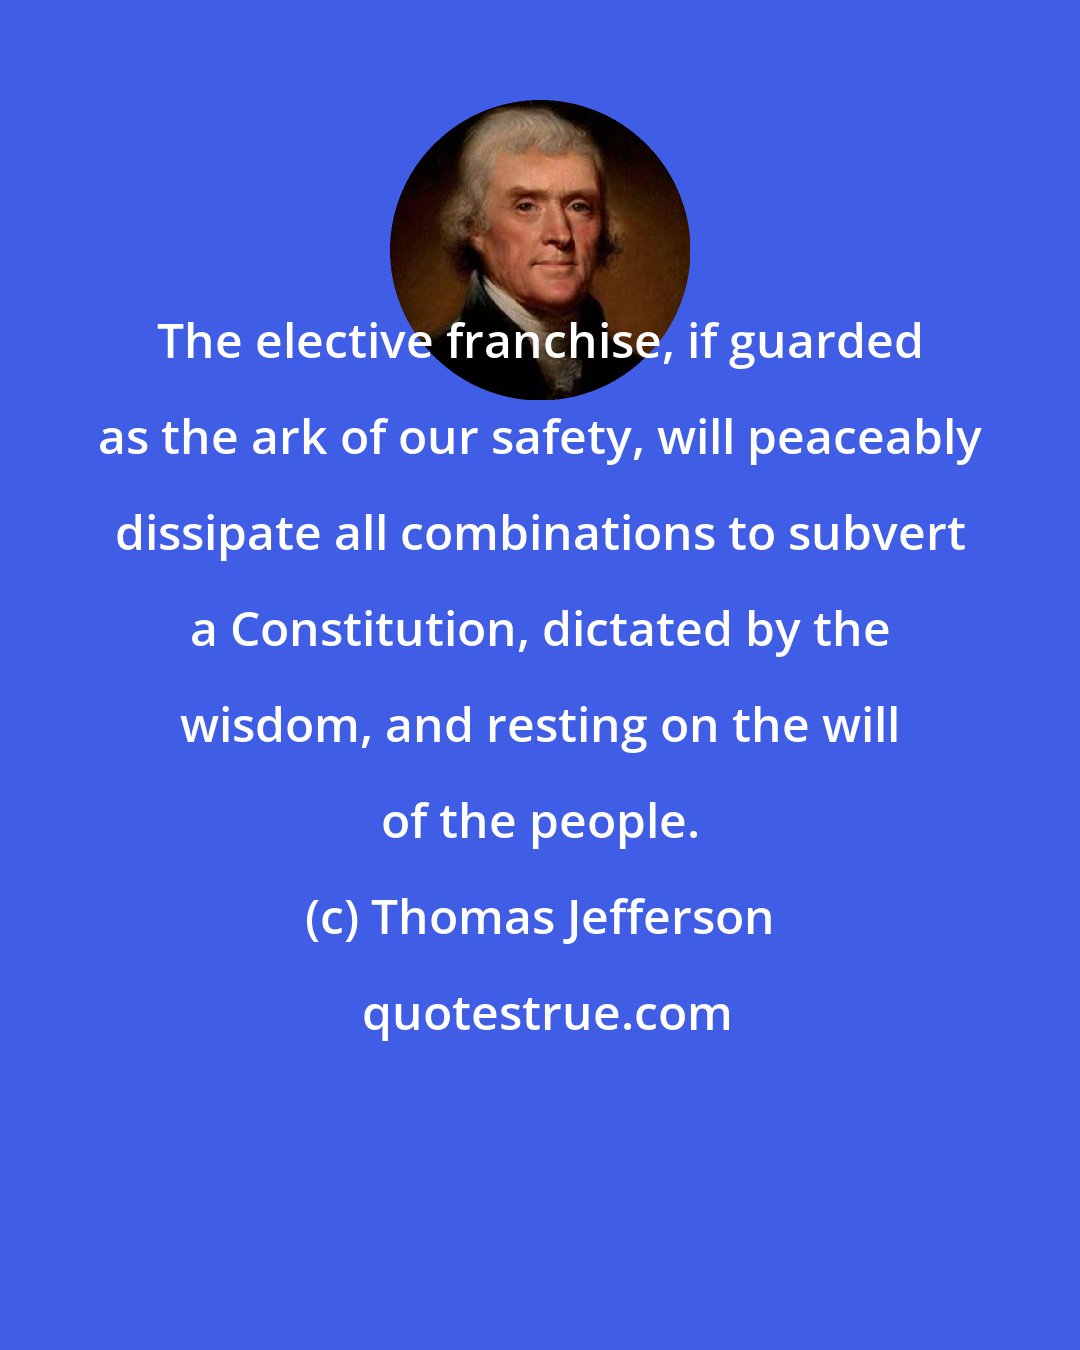 Thomas Jefferson: The elective franchise, if guarded as the ark of our safety, will peaceably dissipate all combinations to subvert a Constitution, dictated by the wisdom, and resting on the will of the people.